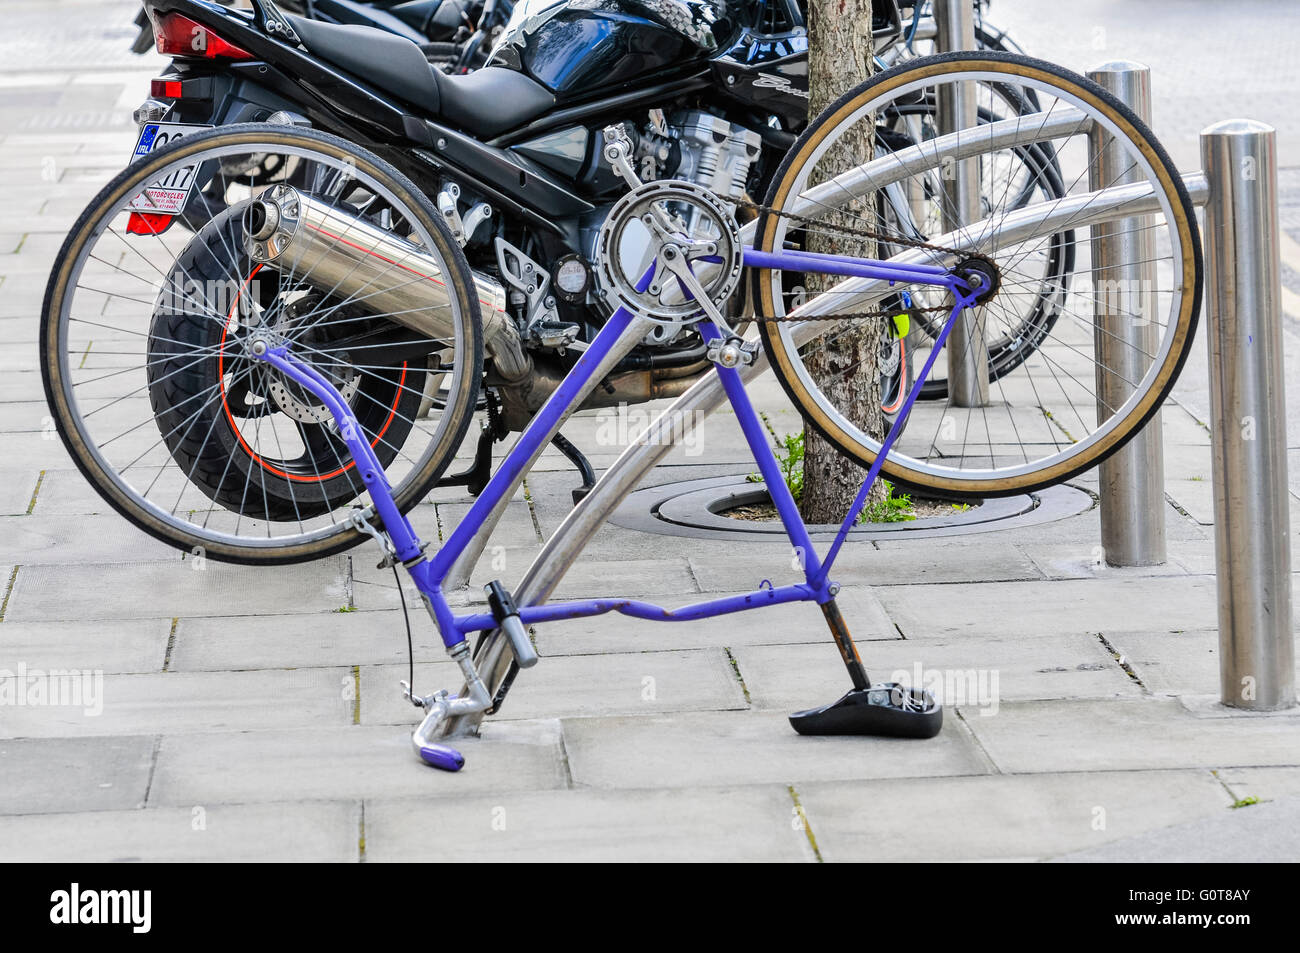 An old, wrecked bicycle is turned upside-down and locked to a bicycle rack on a pavement. Stock Photo